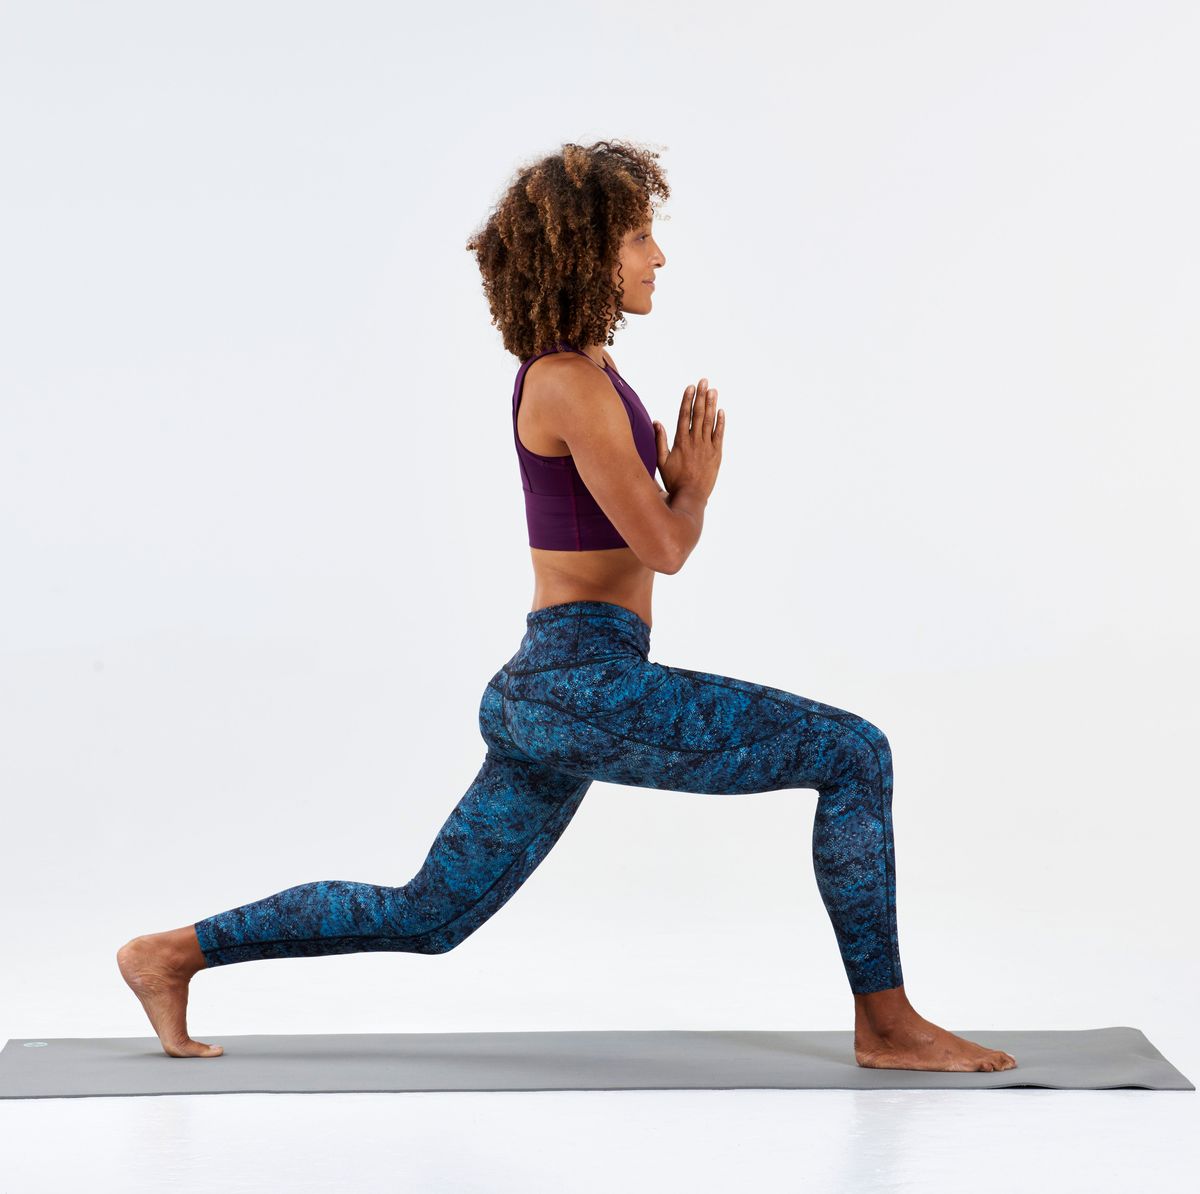 Research shows that doing poses where you keep your core engaged is mo